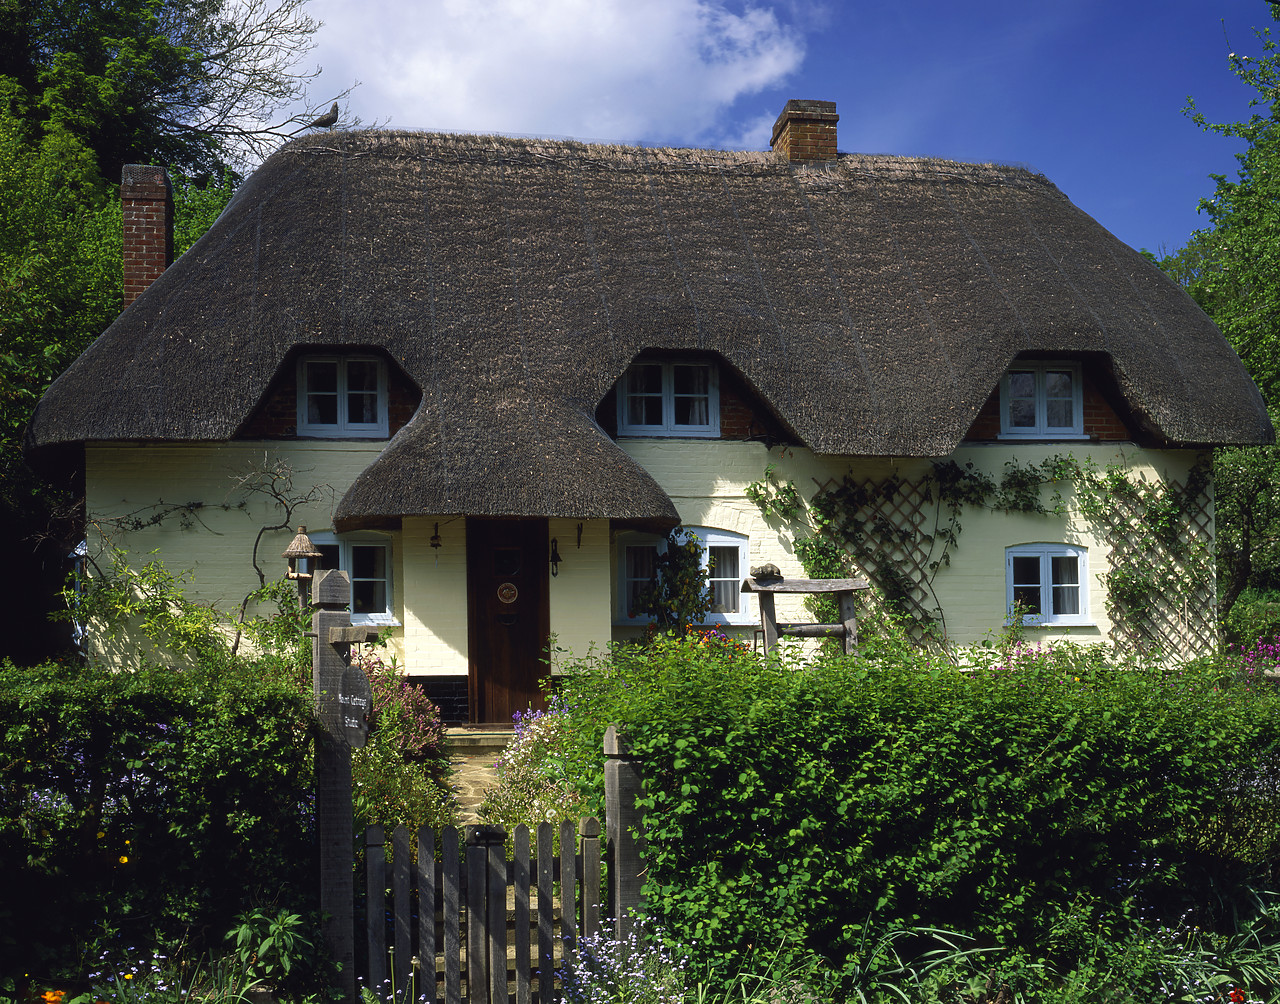 #050121-1 - Thatched Cottage, Wherwell, Hampshire, England